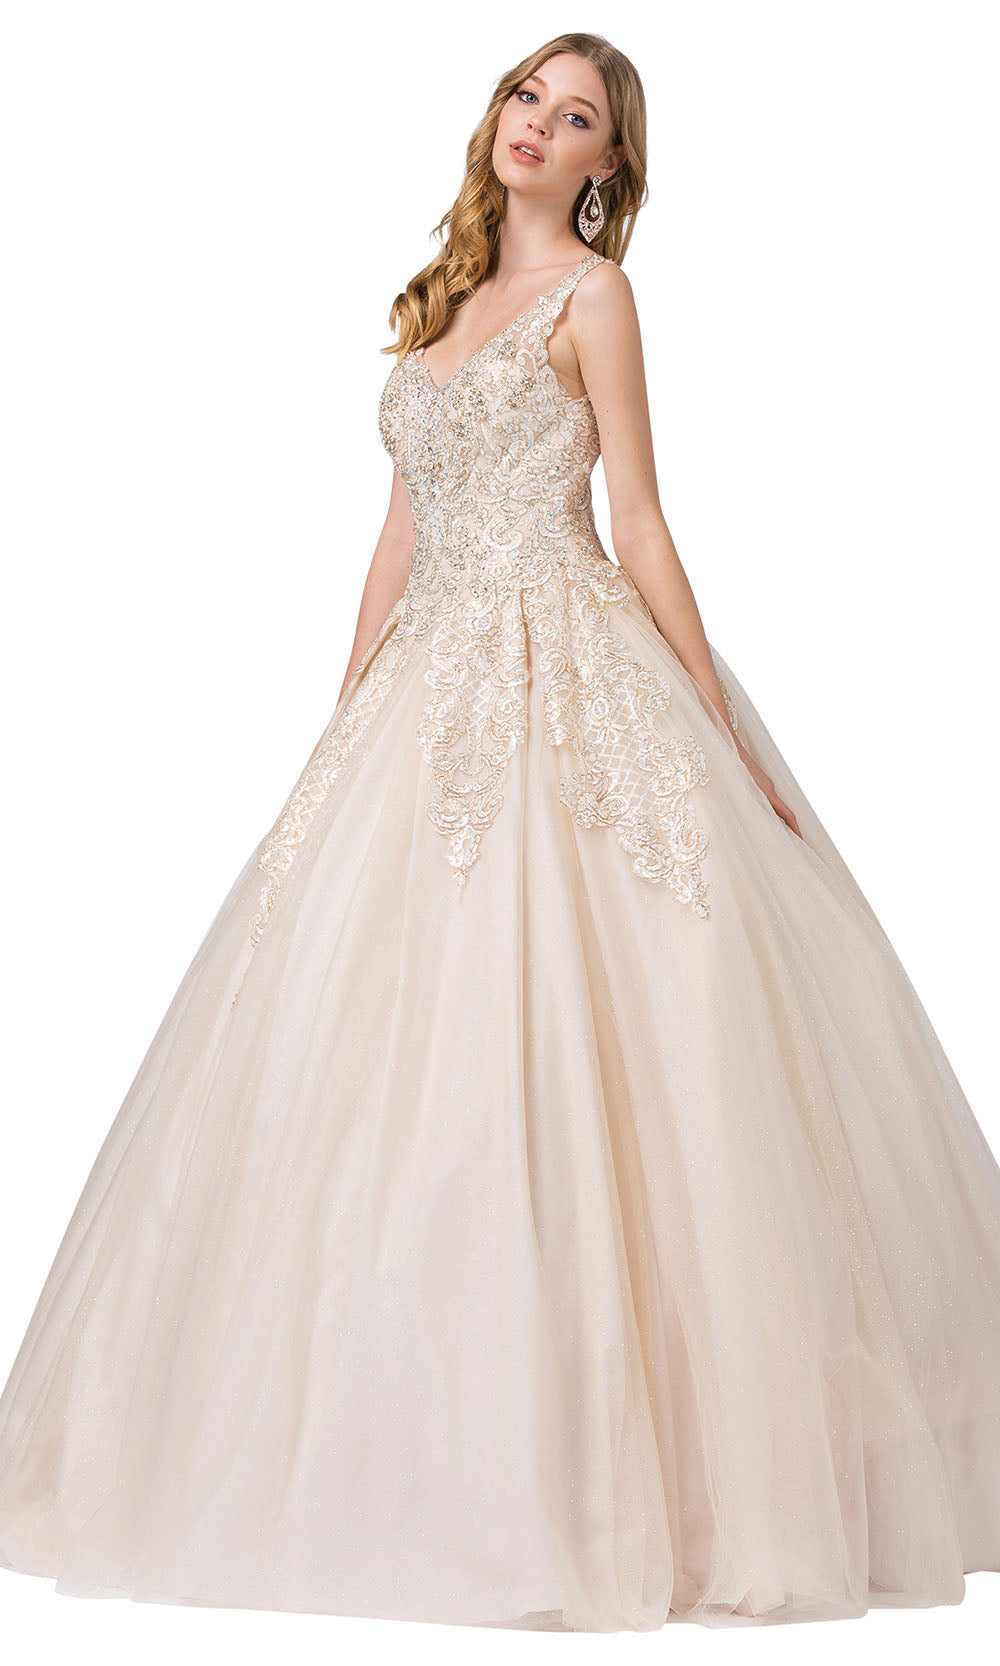 Dancing Queen - 1271 Embroidered Wide V Neck Ballgown In Neutral